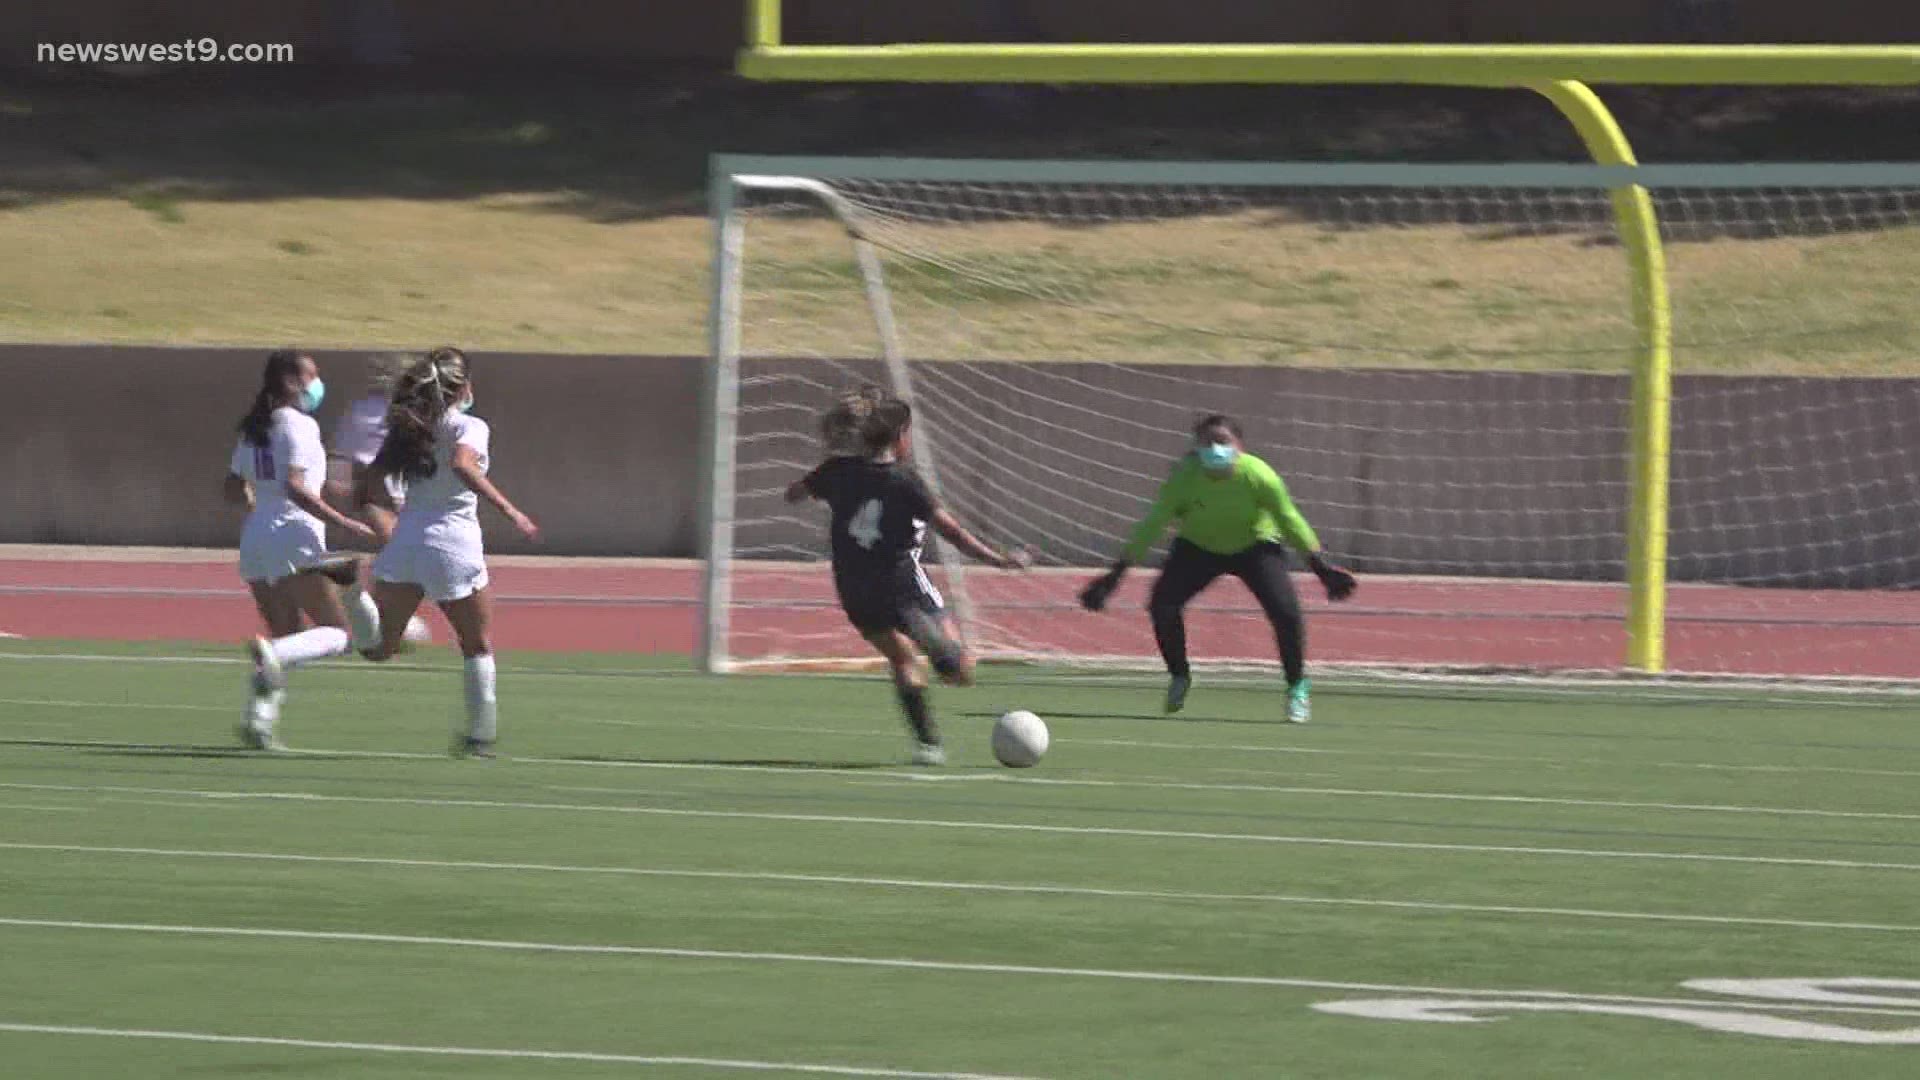 The Panthers took on a tough El Paso Americas squad on the pitch.